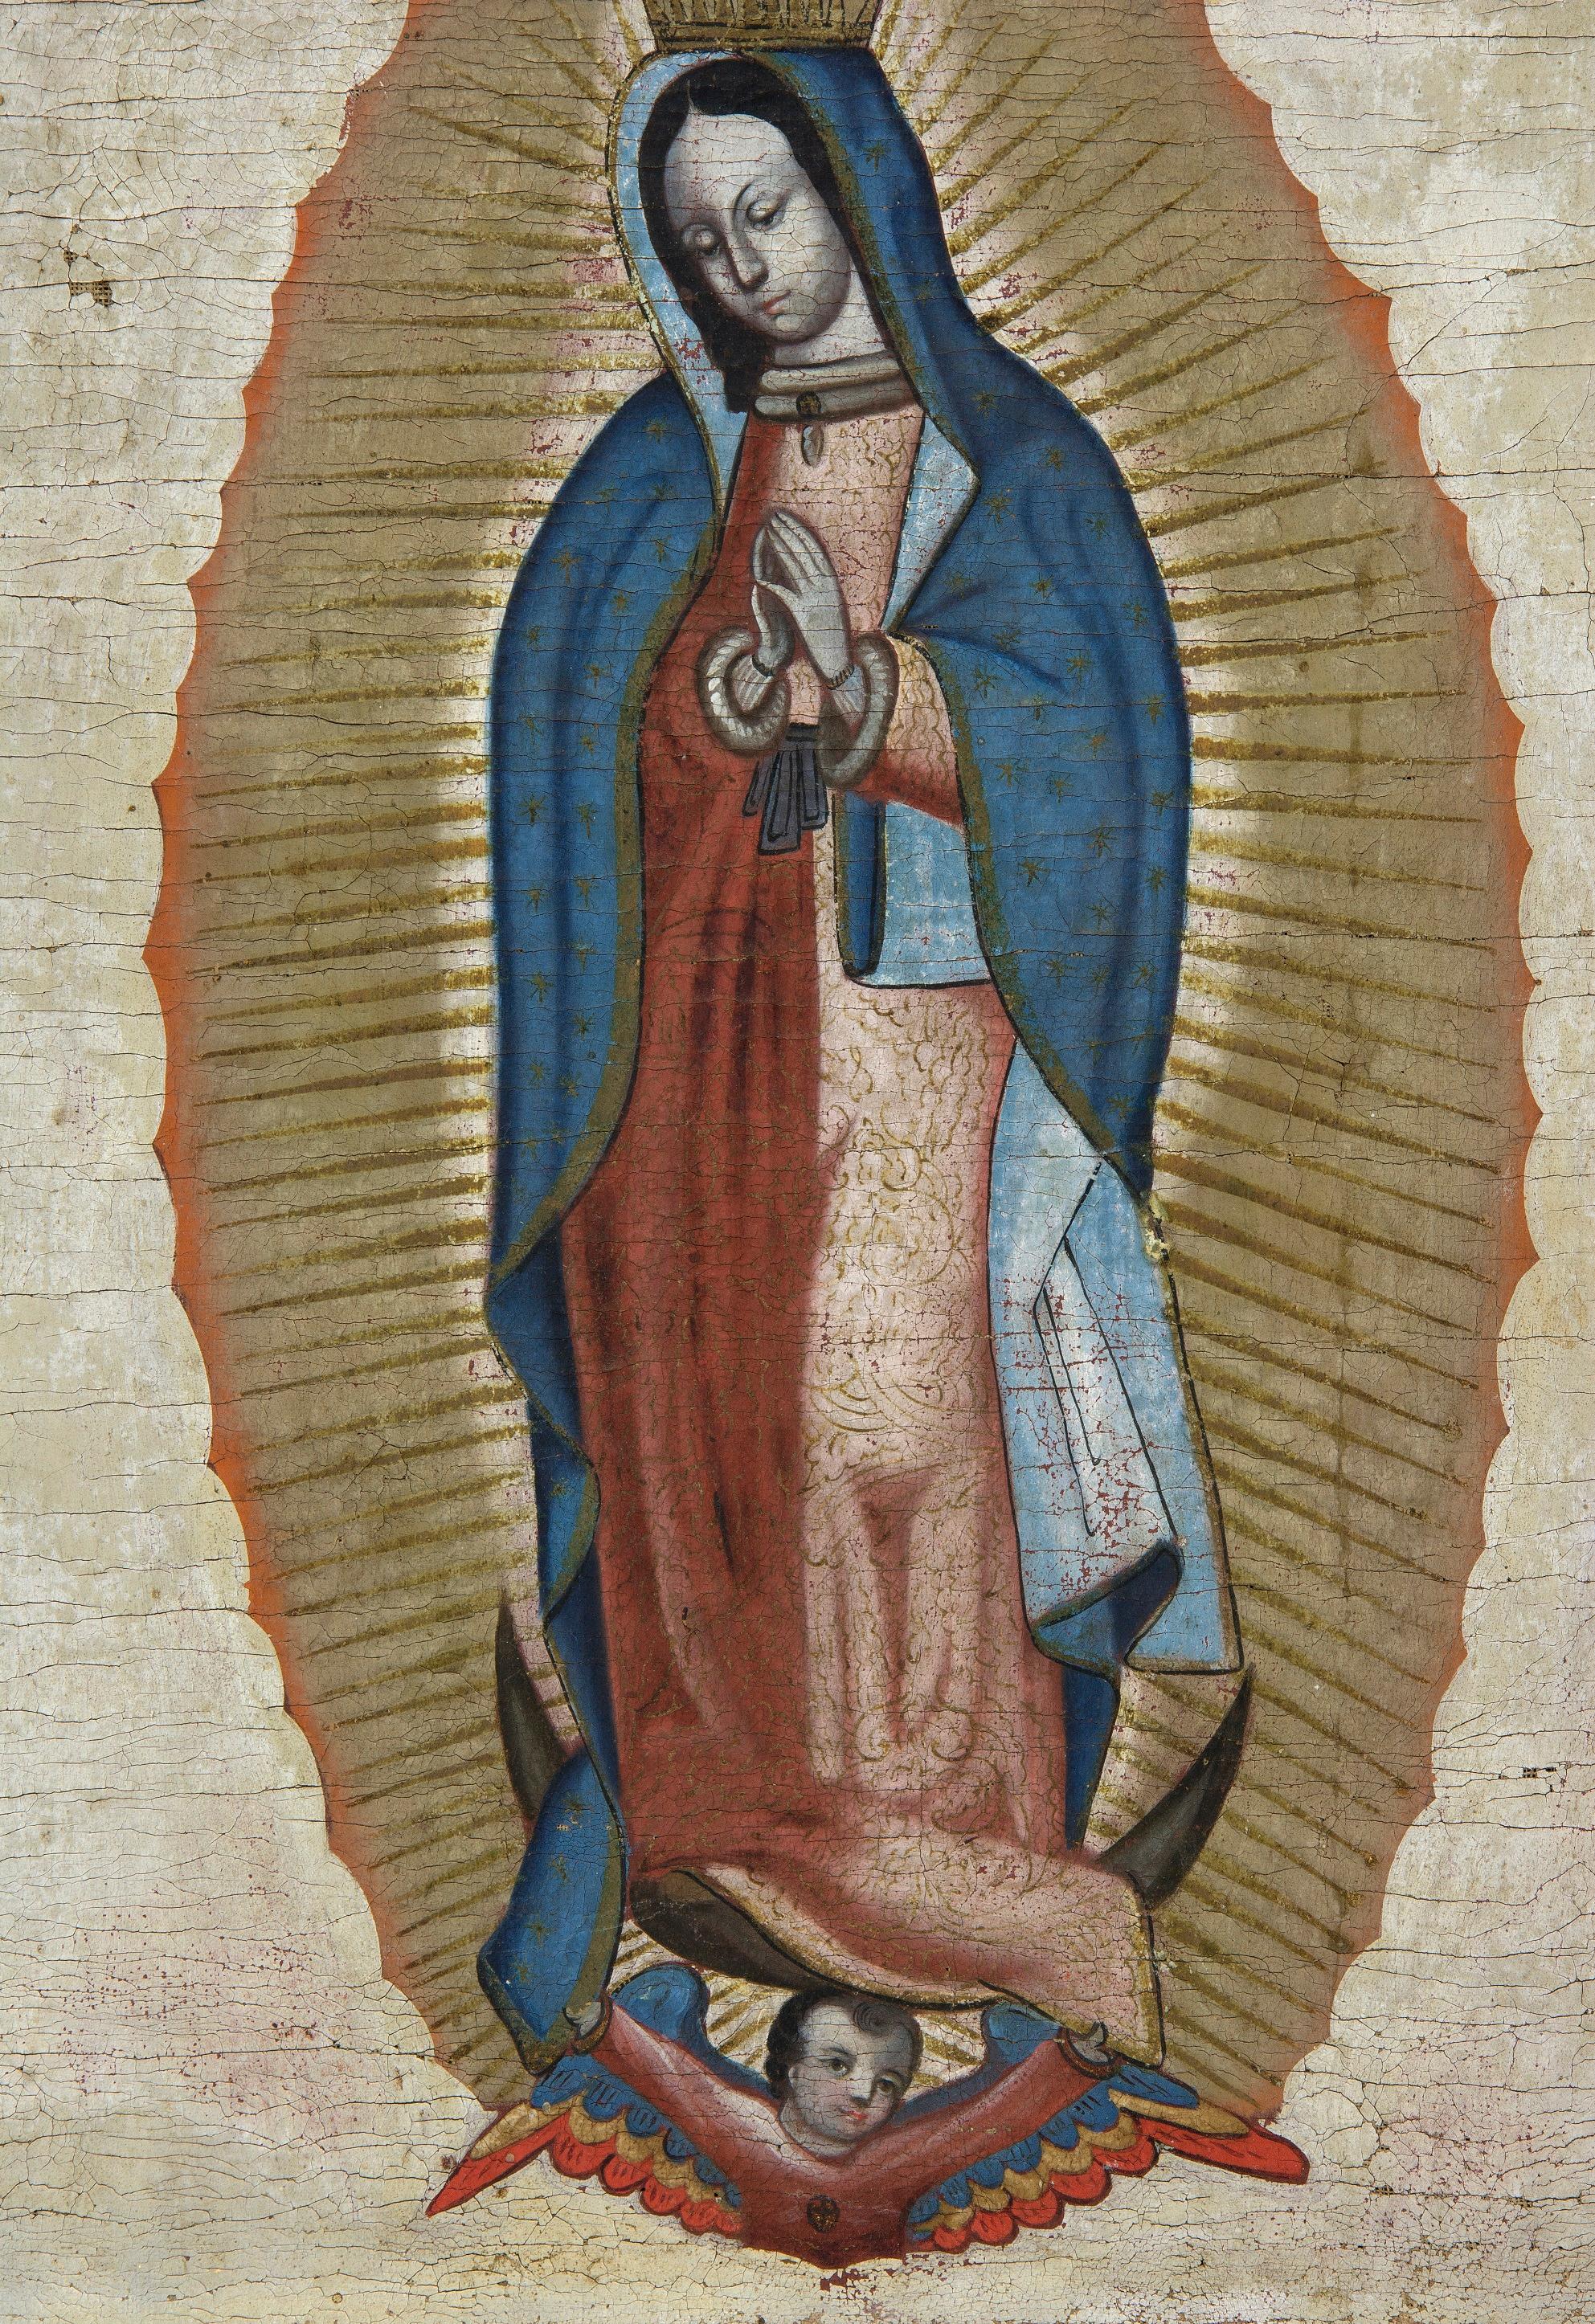 Guadalupe's Virgin. Oil on canvas. Century XVIII. 
 Painting on canvas that shows Our Lady of Guadalupe as seen in the ayate that Juan Diego Cuauhtlatoatzin brought to the Palace of the Bishopric of Mexico and presented to Bishop Juan de Zumárraga,